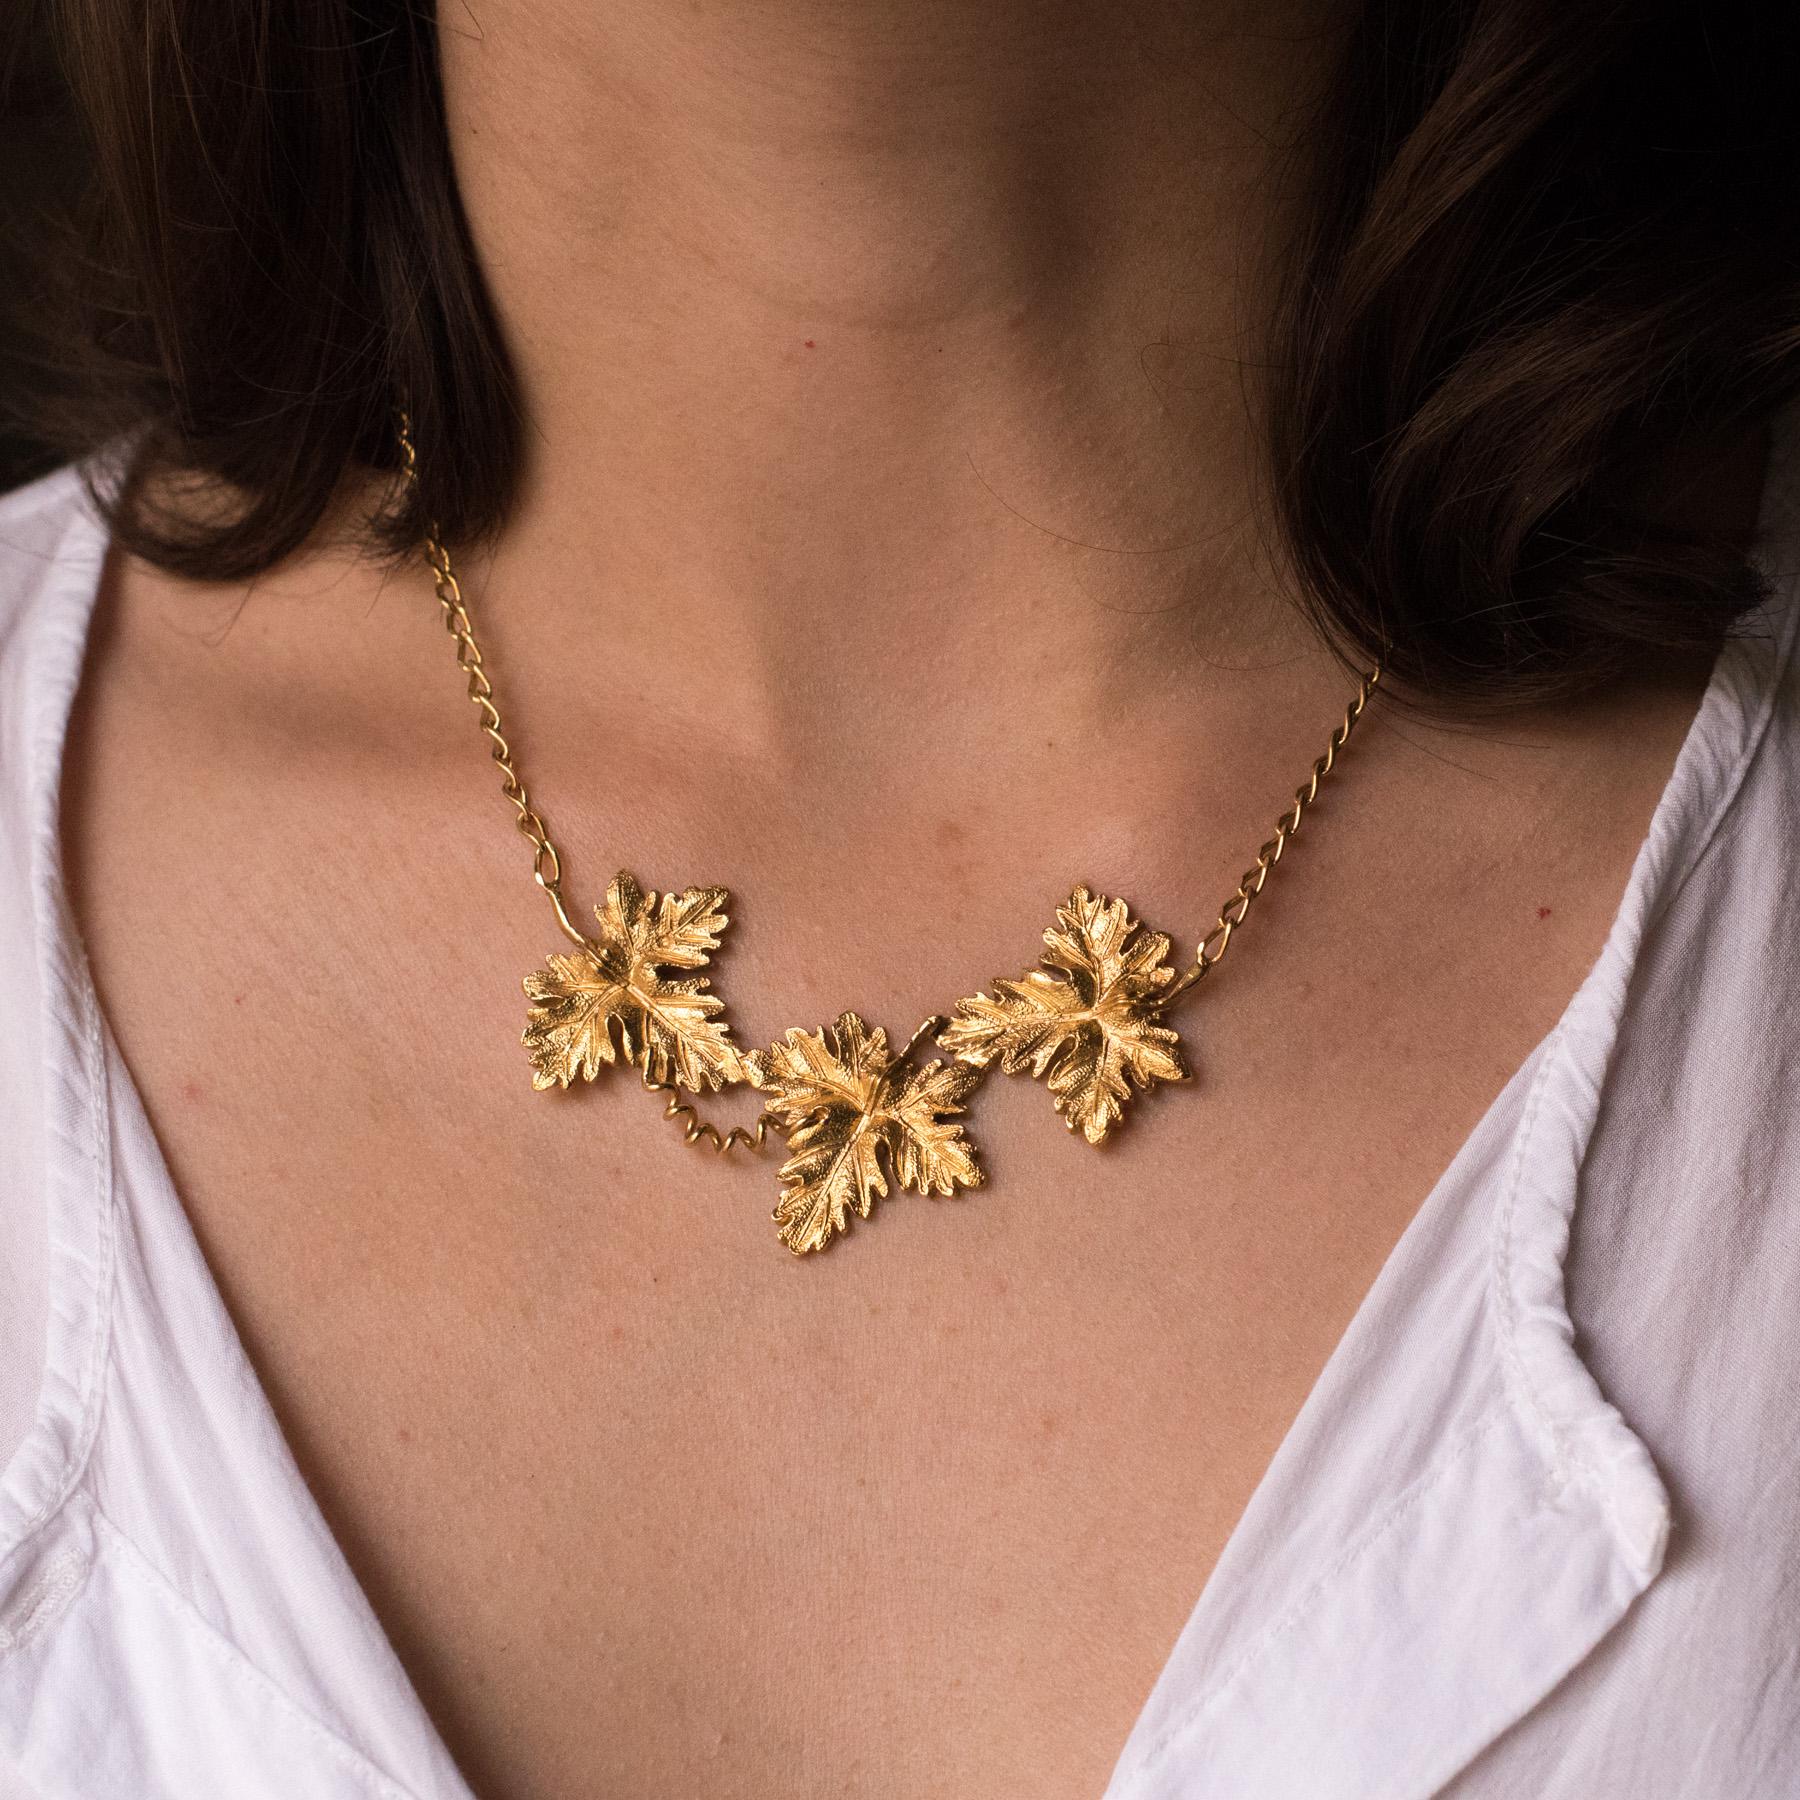 Necklace in vermeil, silver covered with yellow gold, crab hallmark.
Lovely antique jewel, this drapery necklace is made of a pattern of 3 vine leaves retained by a gourmet chain. The clasp is a spring ring.
Total length: 41 cm, pattern height: 4